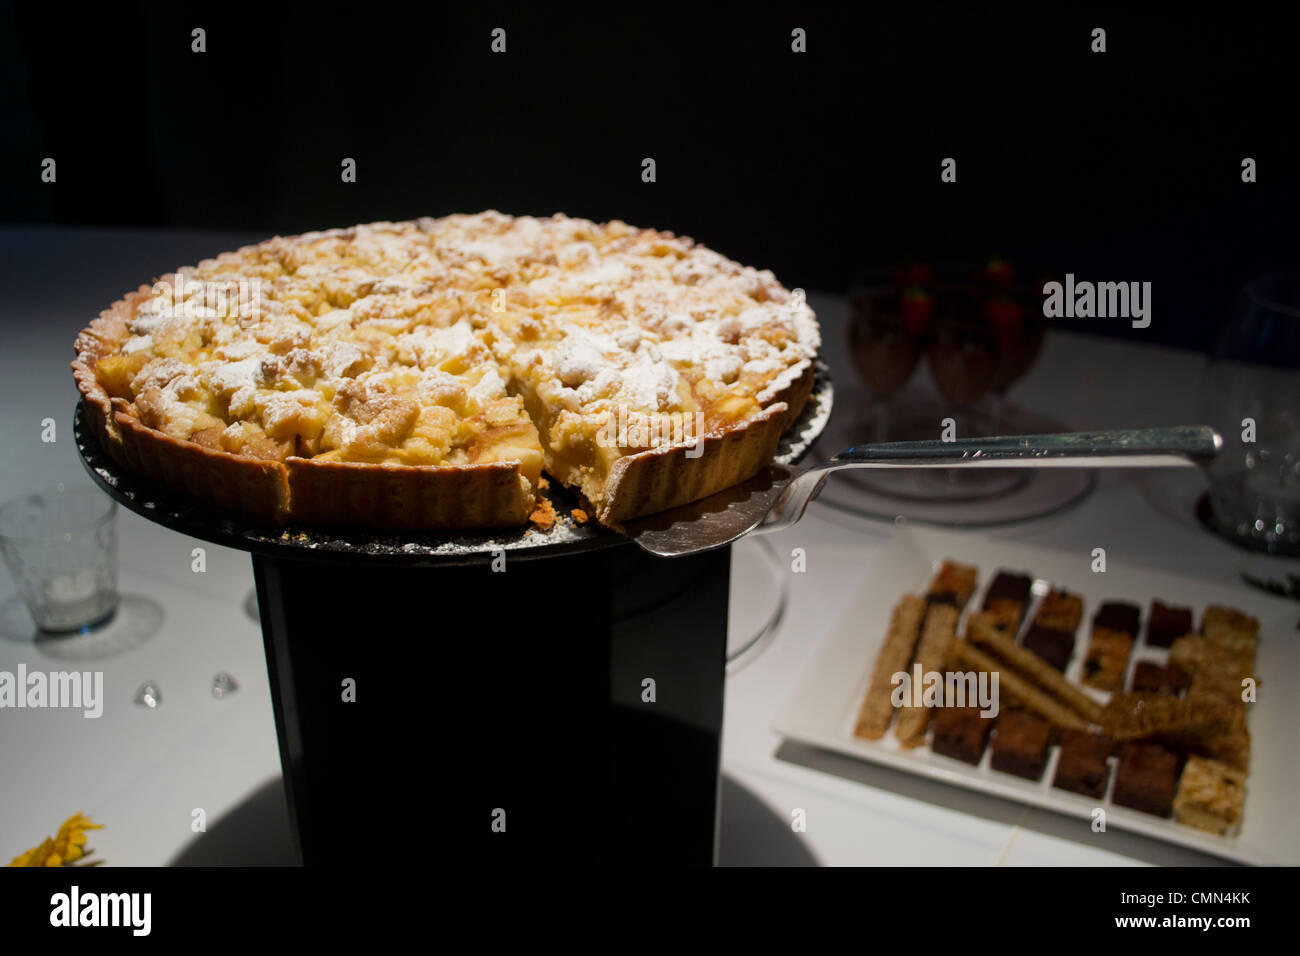 A sweet pie on a plinth with a pie slicer/server Stock Photo